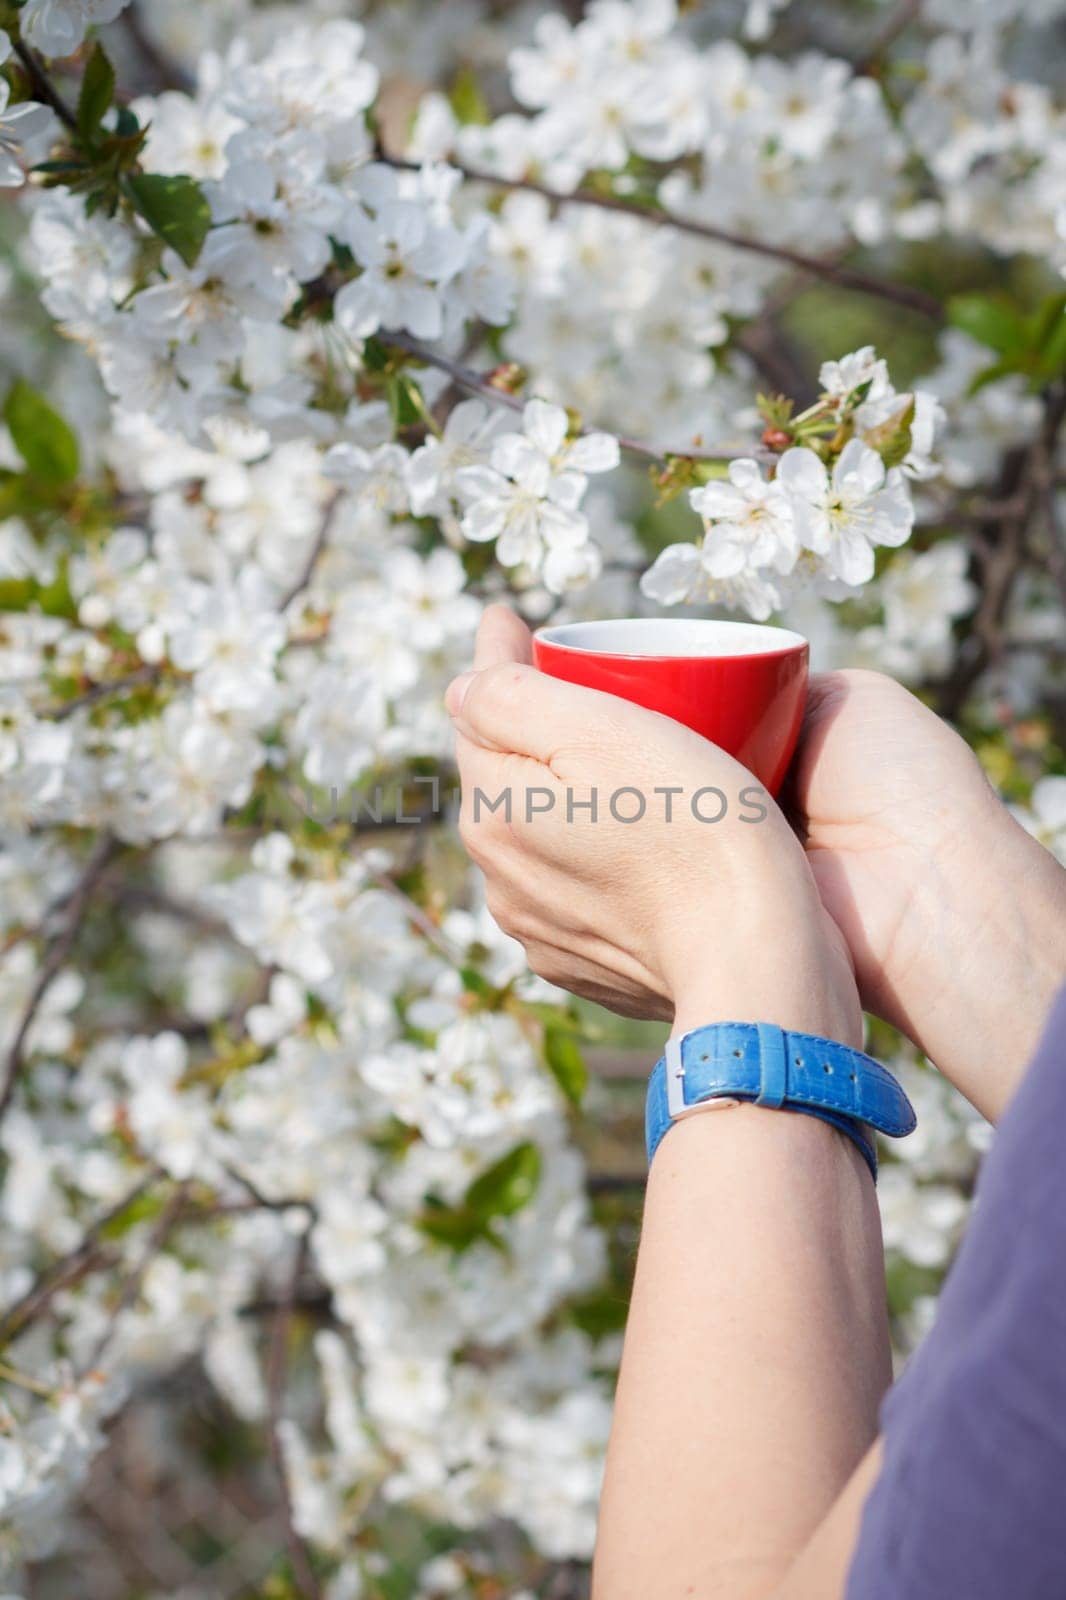 Female hands with wrist watch hold a porcelain cup of coffee with flowering cherry tree on the background. Selective focus on cup.